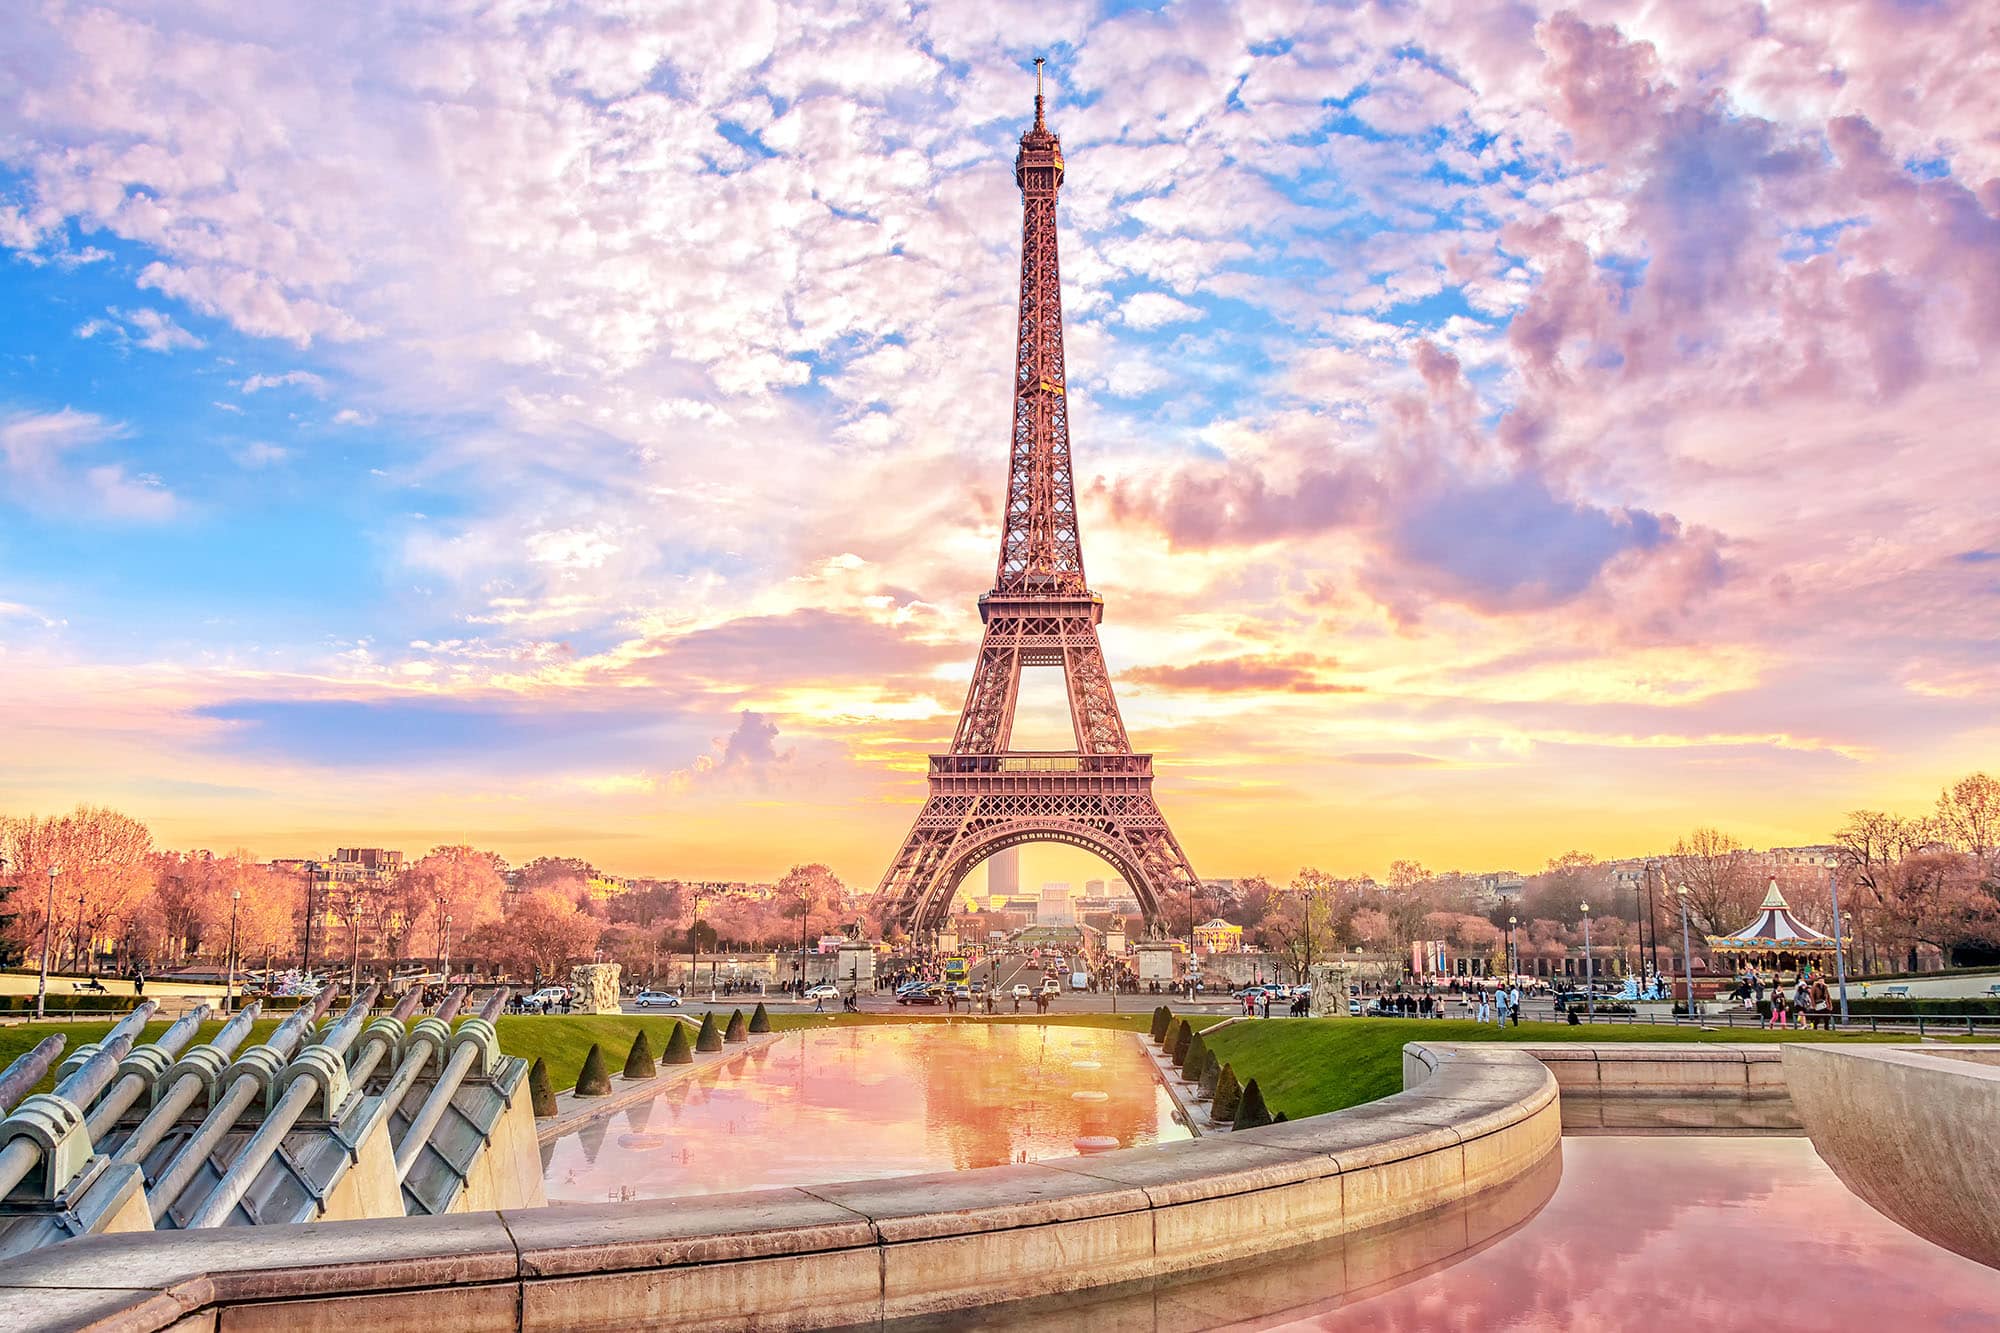 Sunset picture of the Eiffel Tower